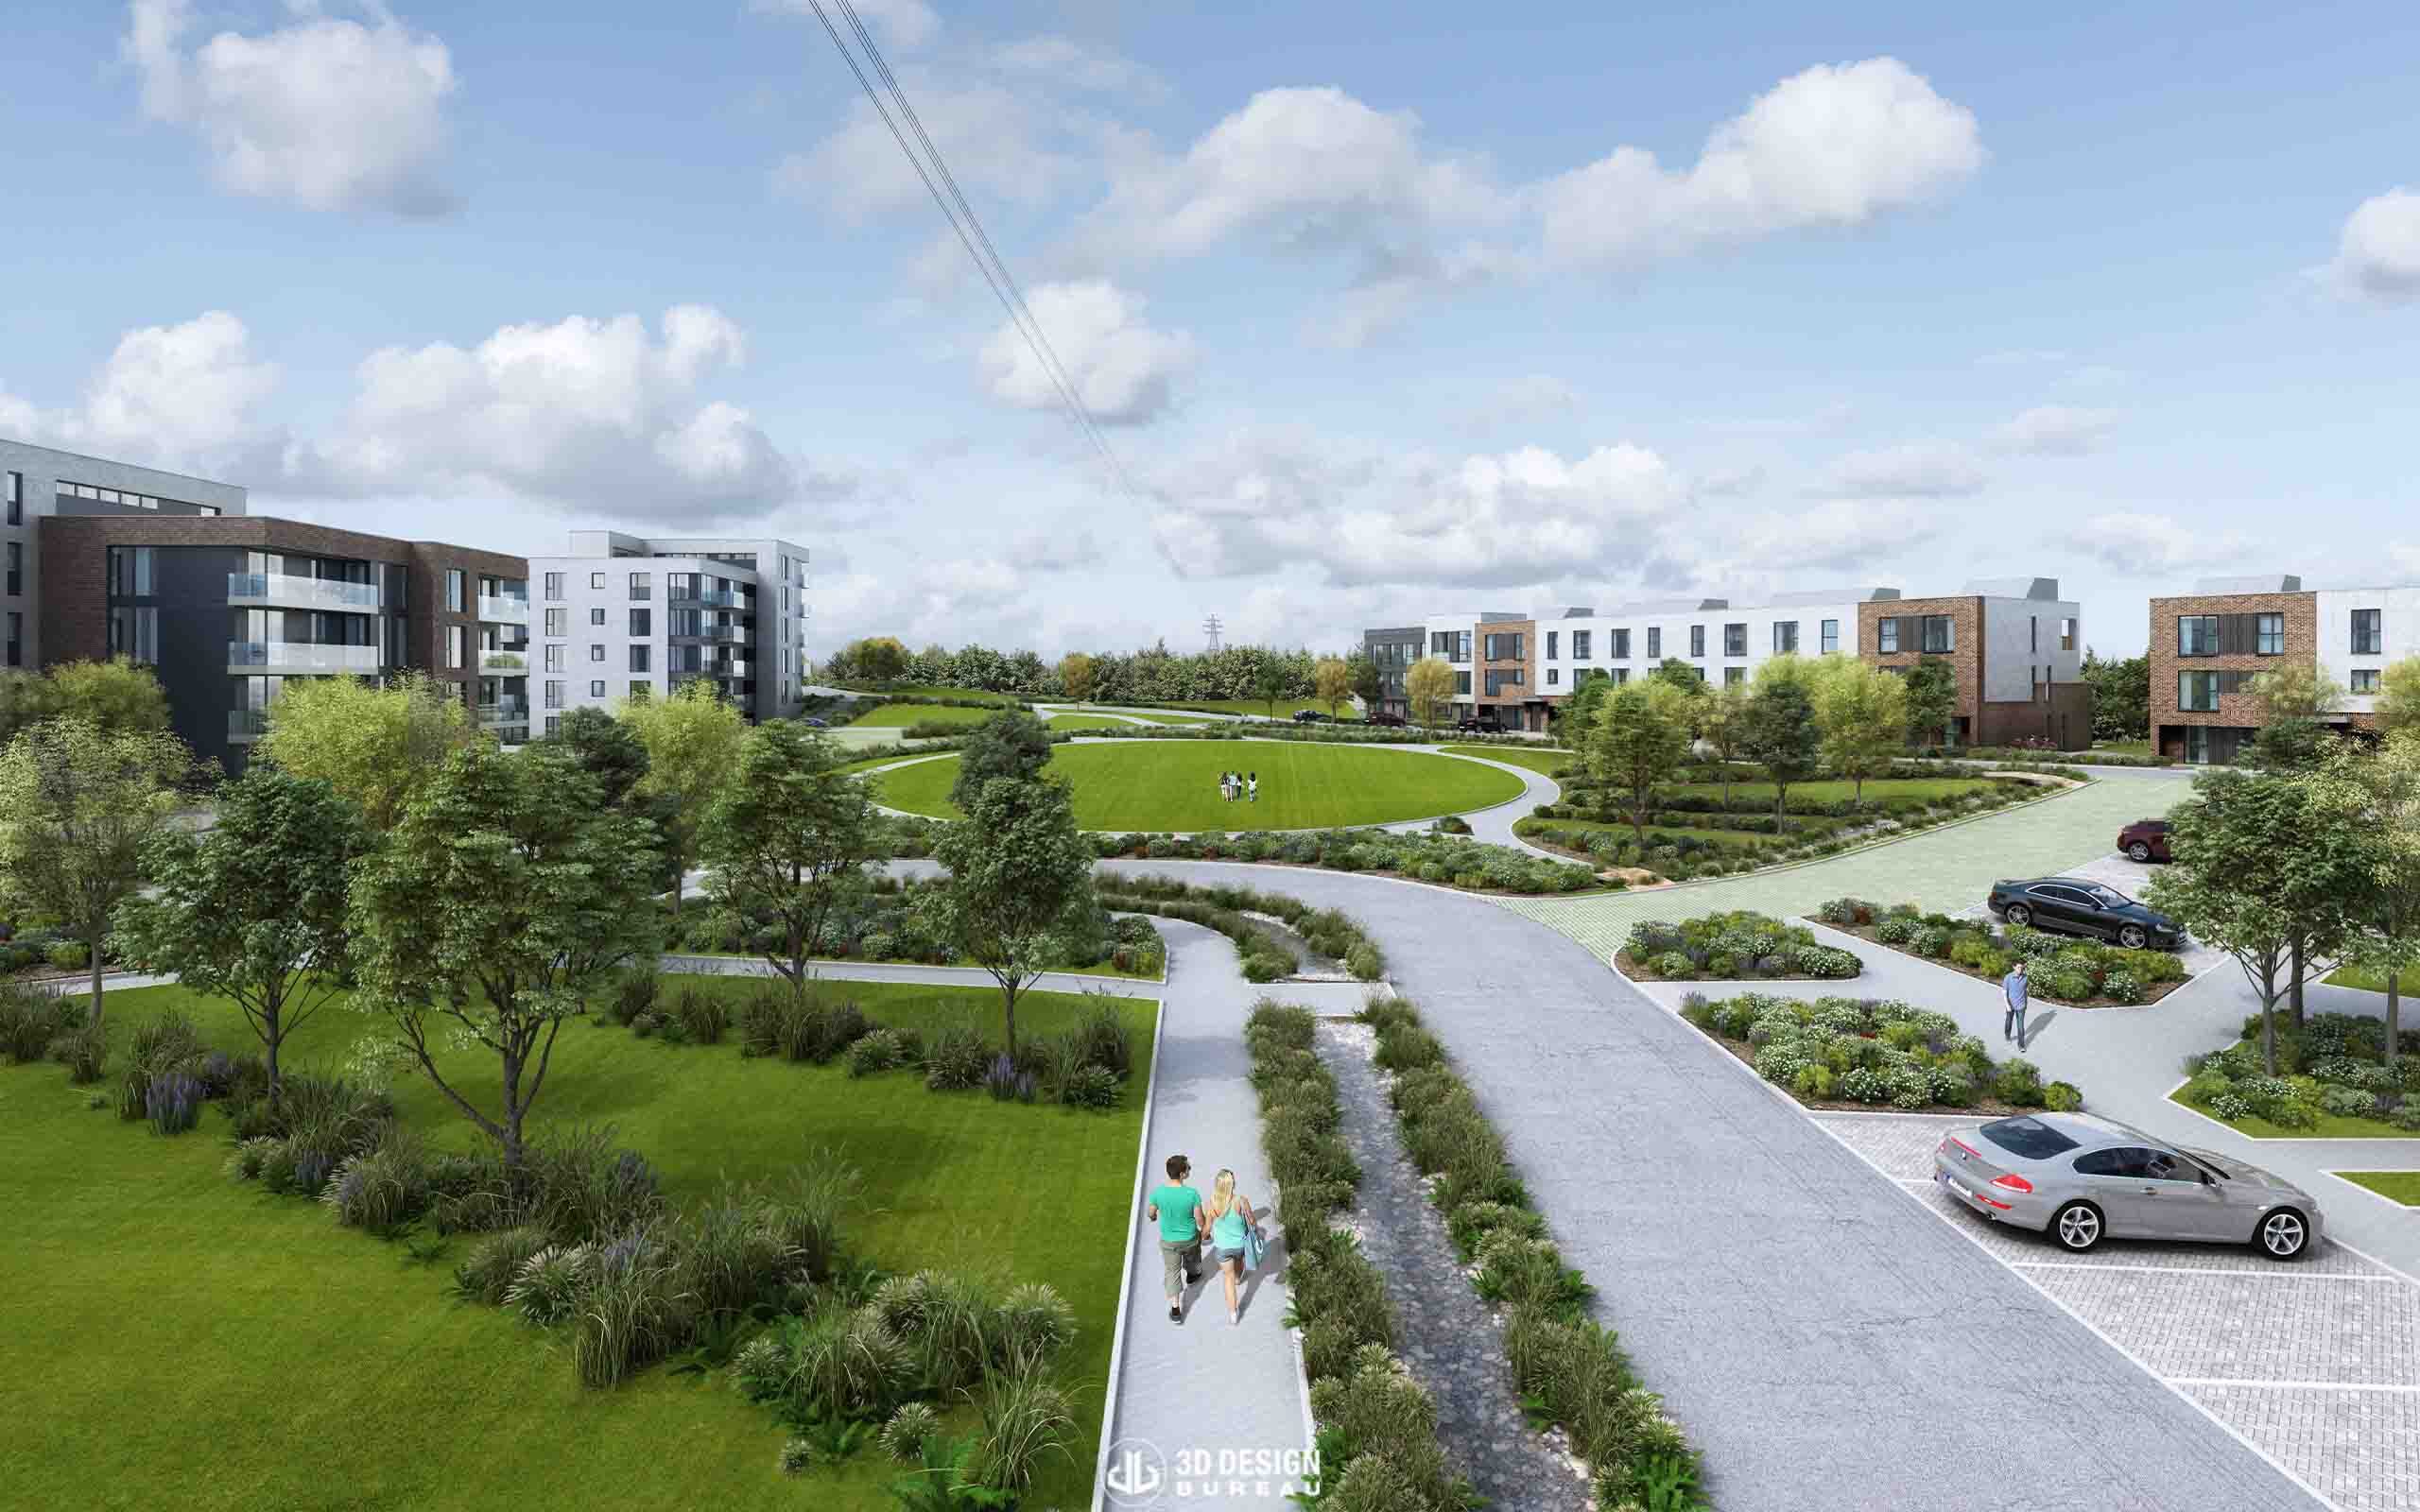 Computer generated imagery of the proposed development in Kiltiernan